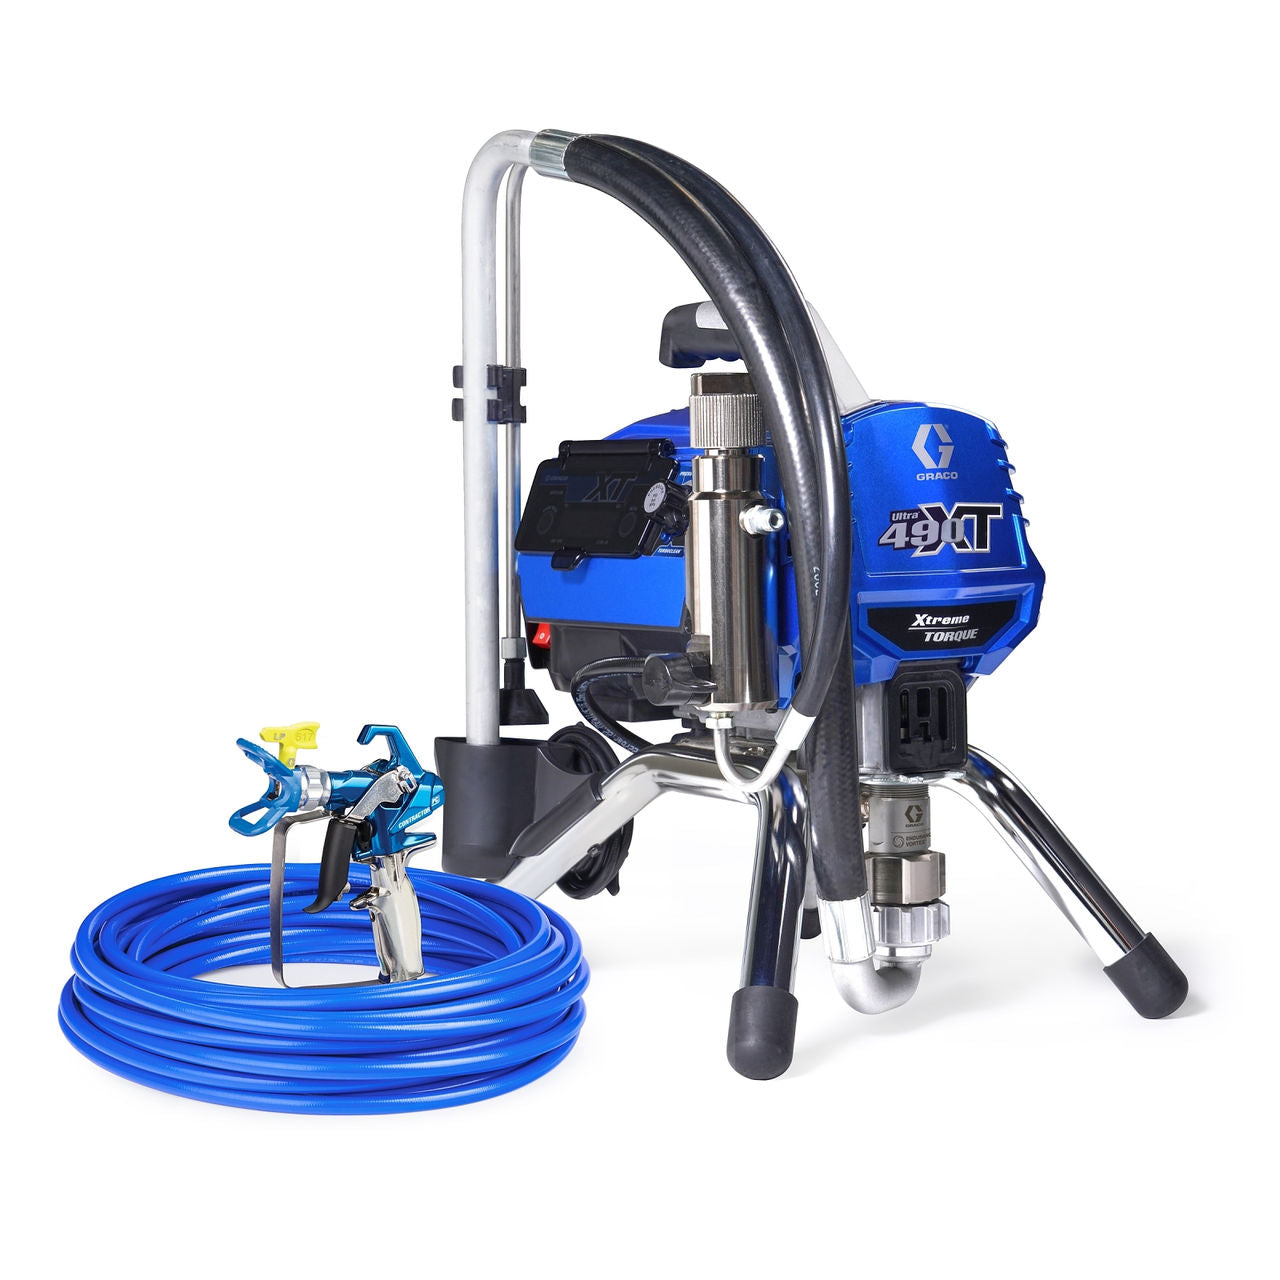 GRACO Ultra 490 XT Stand